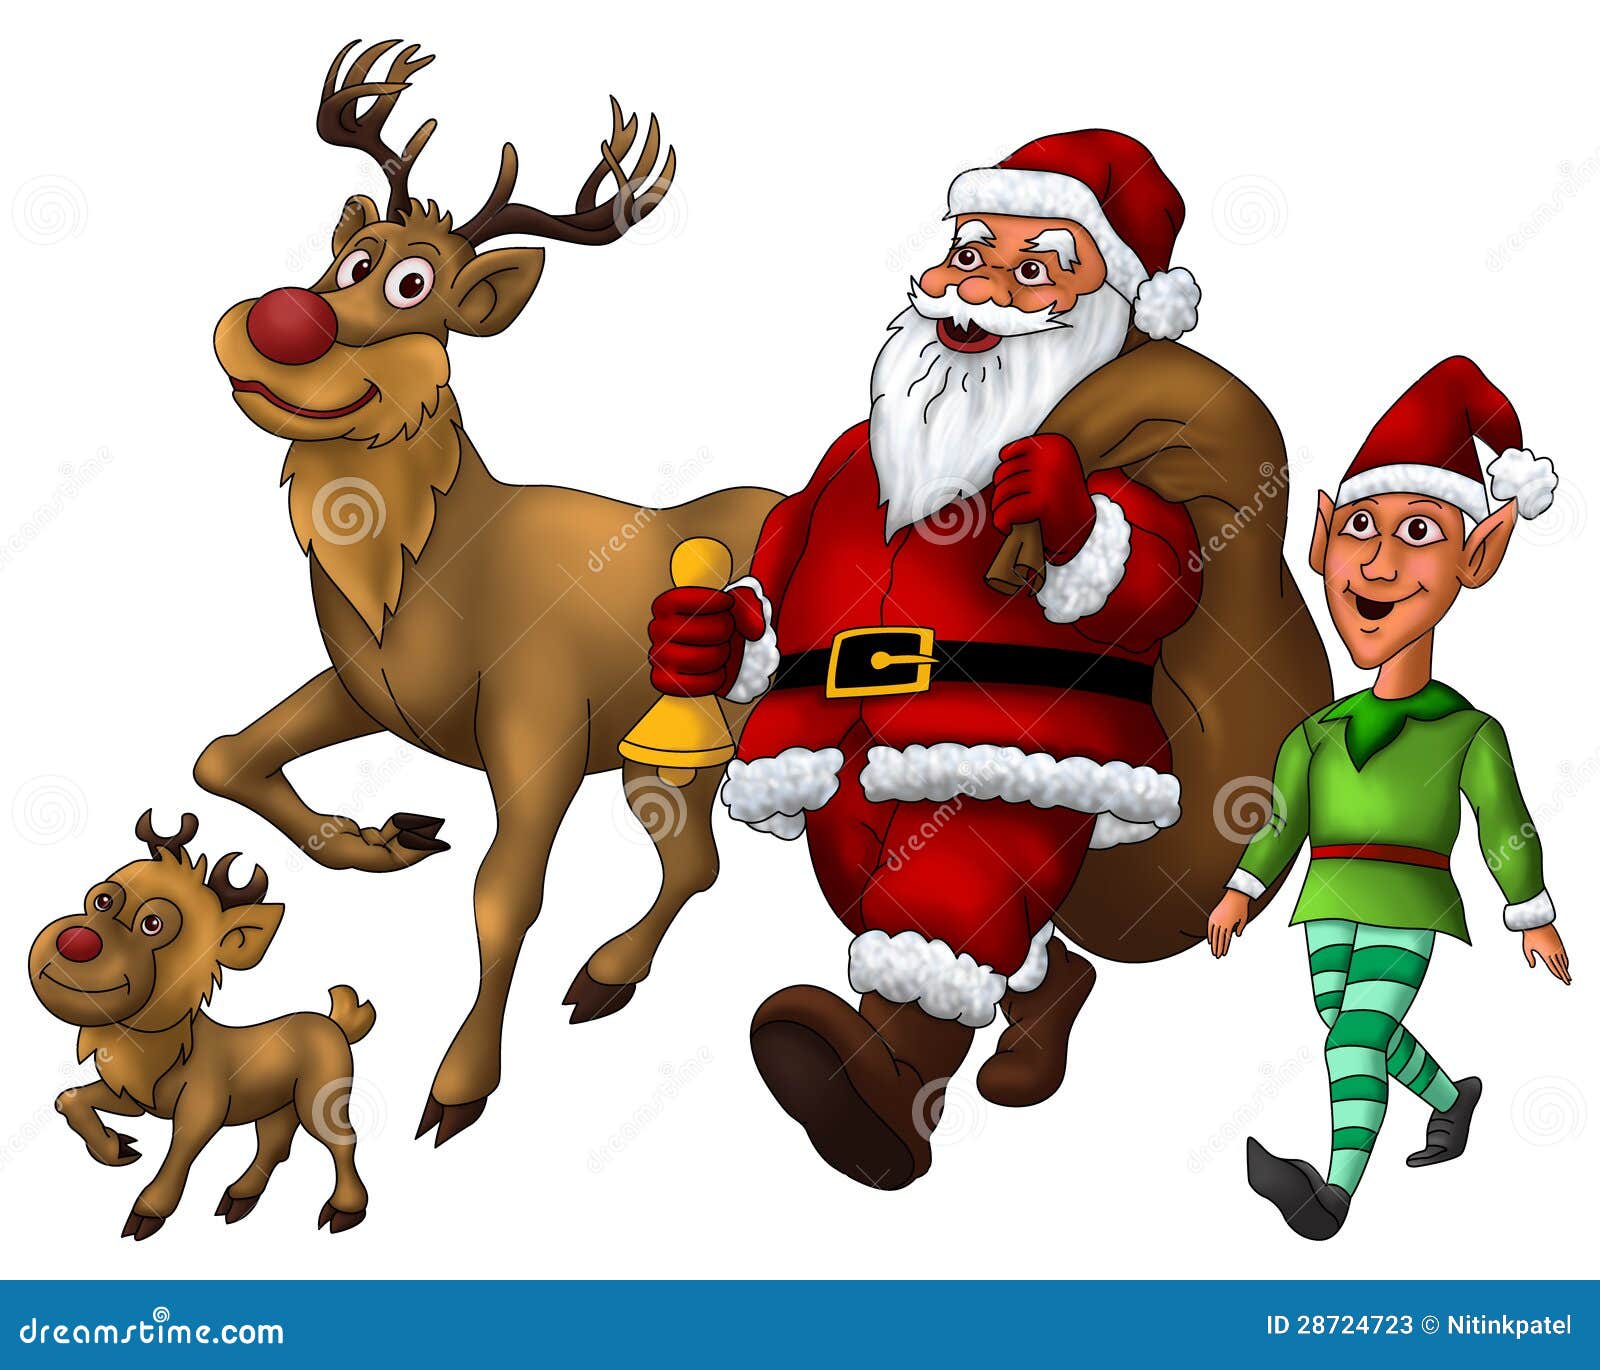 Santa Claus distributing ts with Elf and his Rudolph on Christmas Day